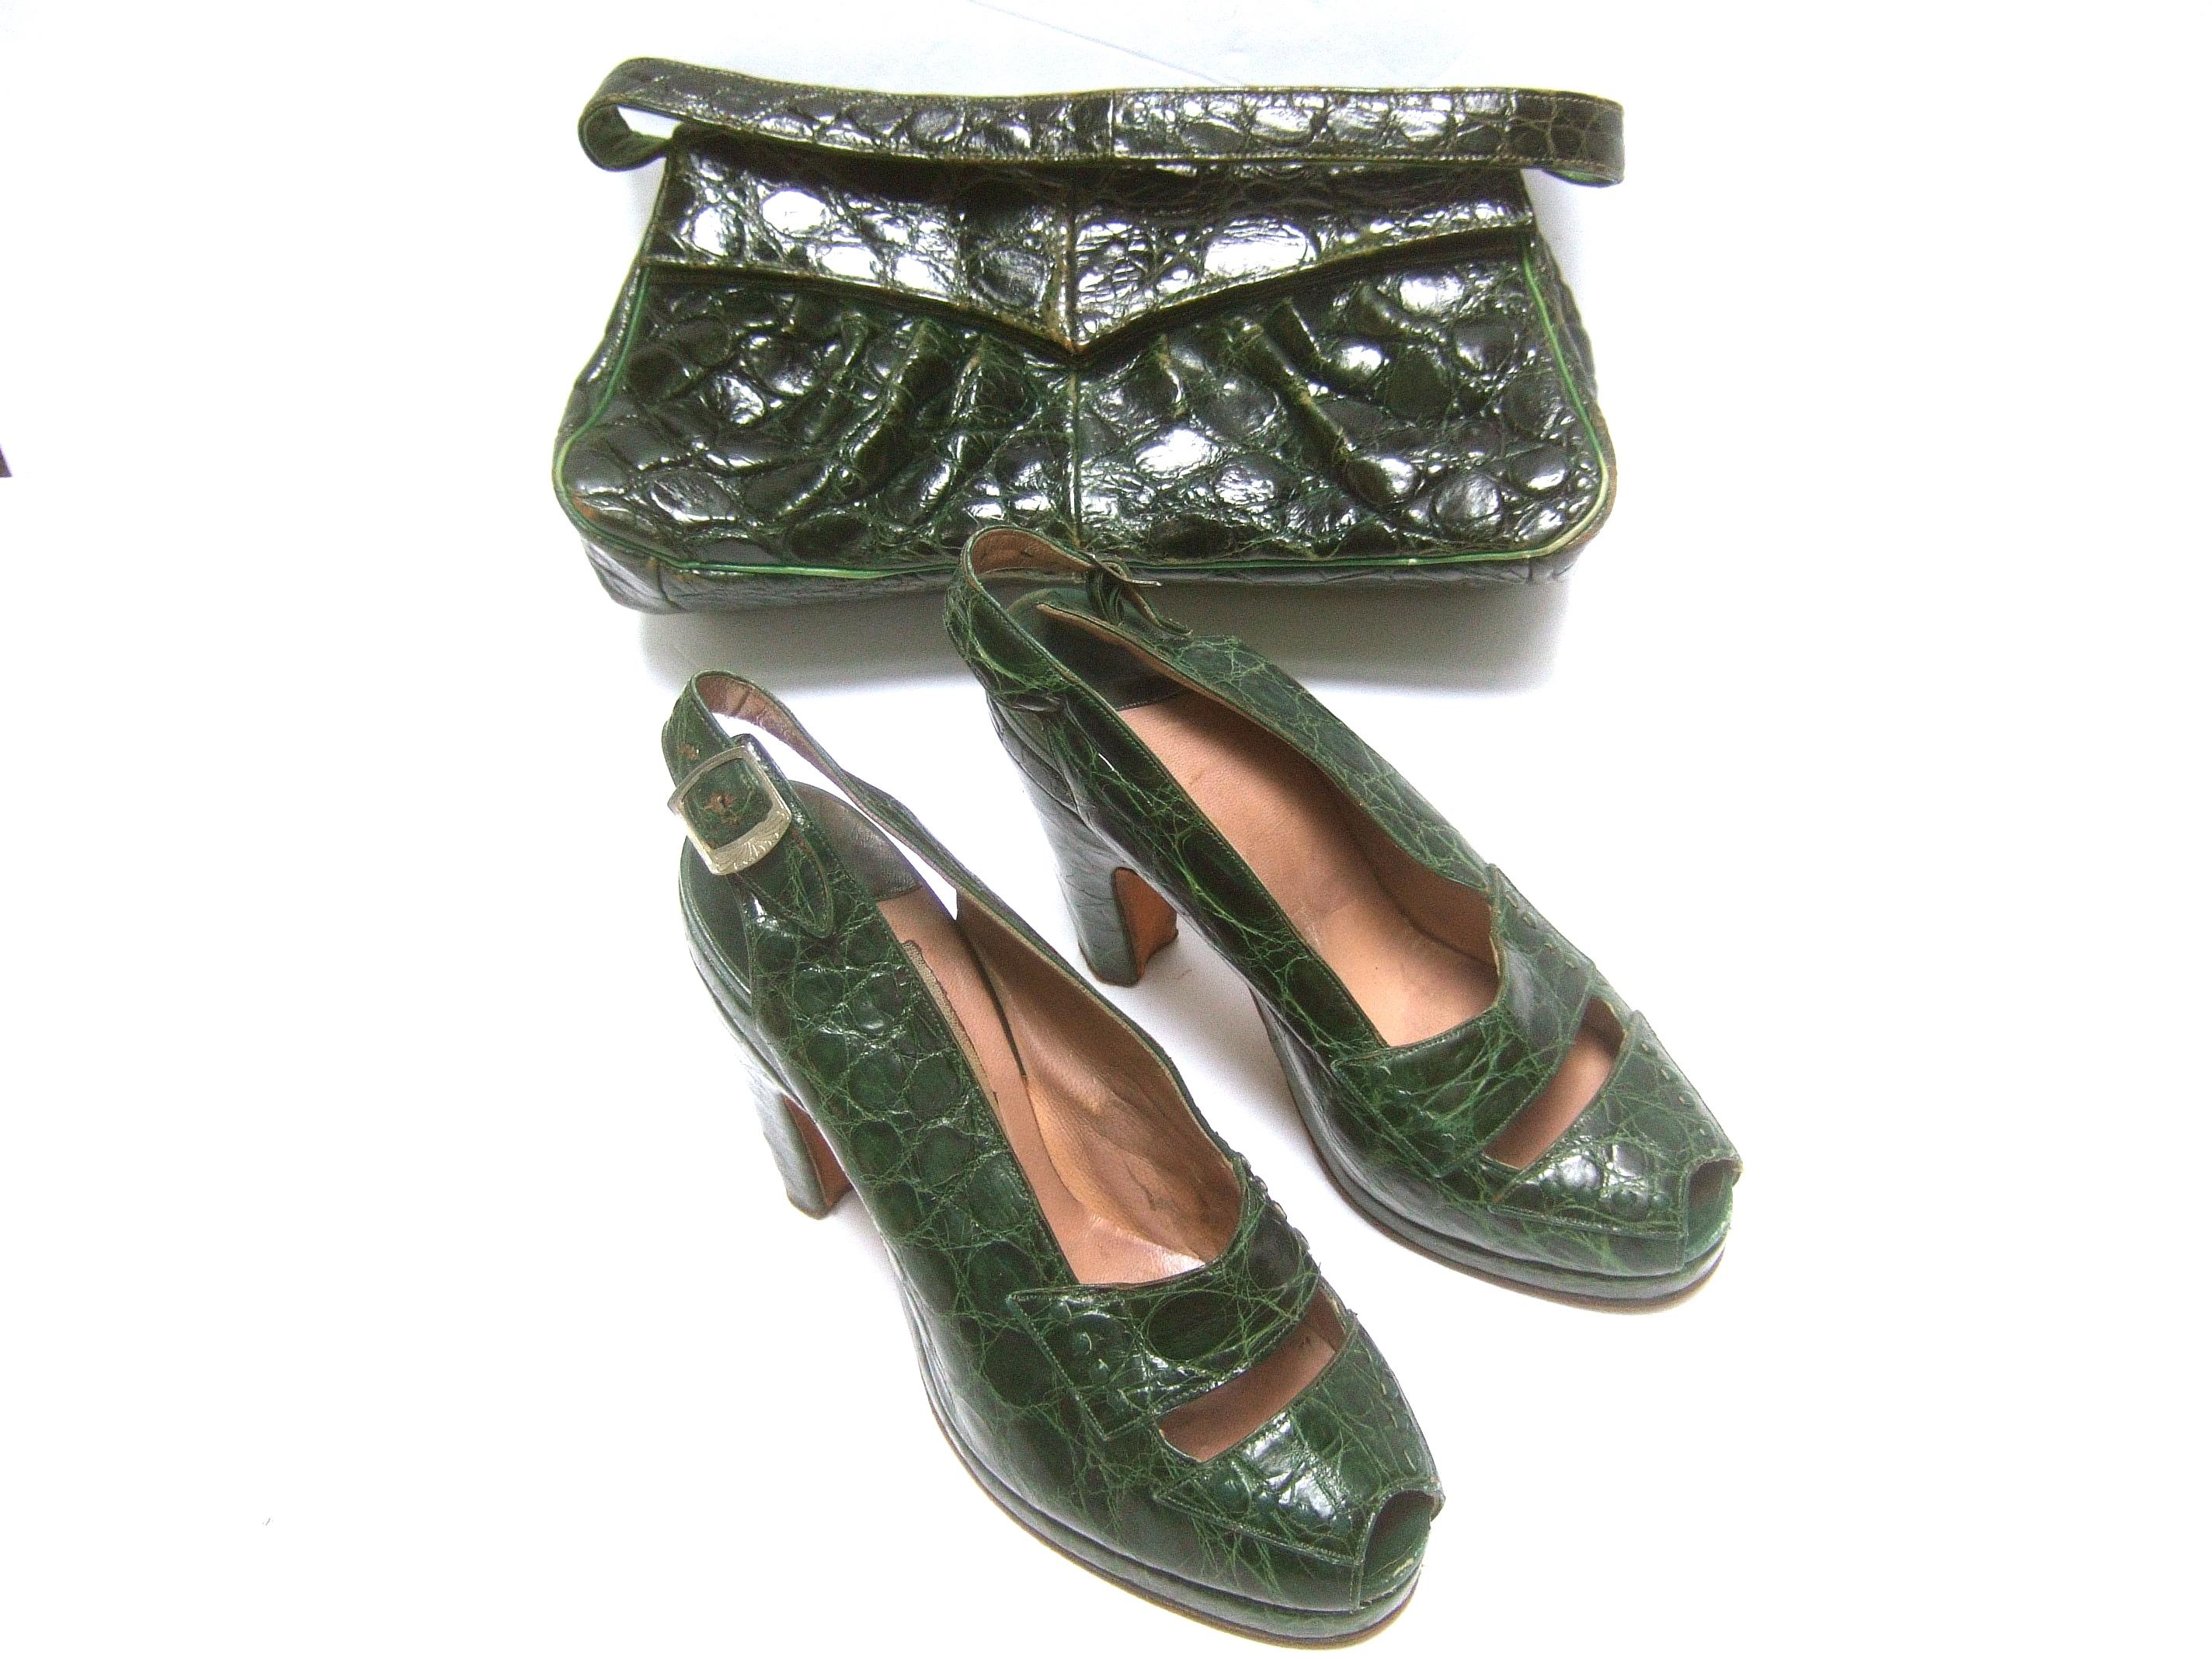 Saks Fifth Avenue 1940s Green alligator handbag & peep toe pumps set  
The stylish retro ensemble is comprised of a sleek forest green 
dyed alligator handbag; paired with the matching green alligator shoes

The ensemble makes a very chic, elegant